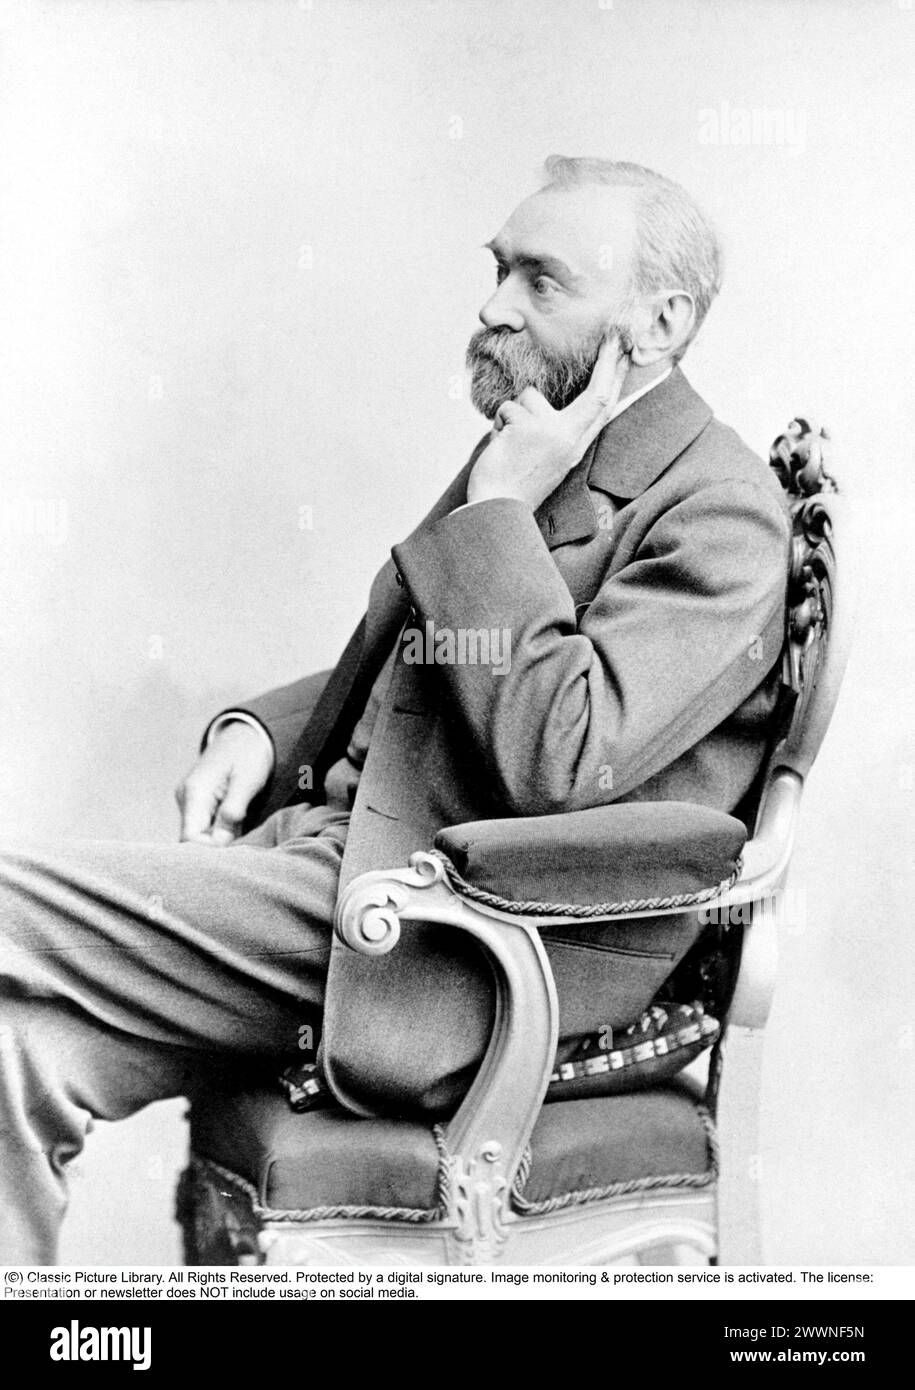 Alfred Bernhard Nobel ( 21 October 1833 – 10 December 1896) was a Swedish chemist, inventor, engineer and businessman. He is known for inventing dynamite as well as having bequeathed his fortune to establish the Nobel Prize. He also made several important contributions to science, holding 355 patents in his lifetime. Nobel's most famous invention was dynamite, an explosive using nitroglycerin; it was patented in 1867. Stock Photo